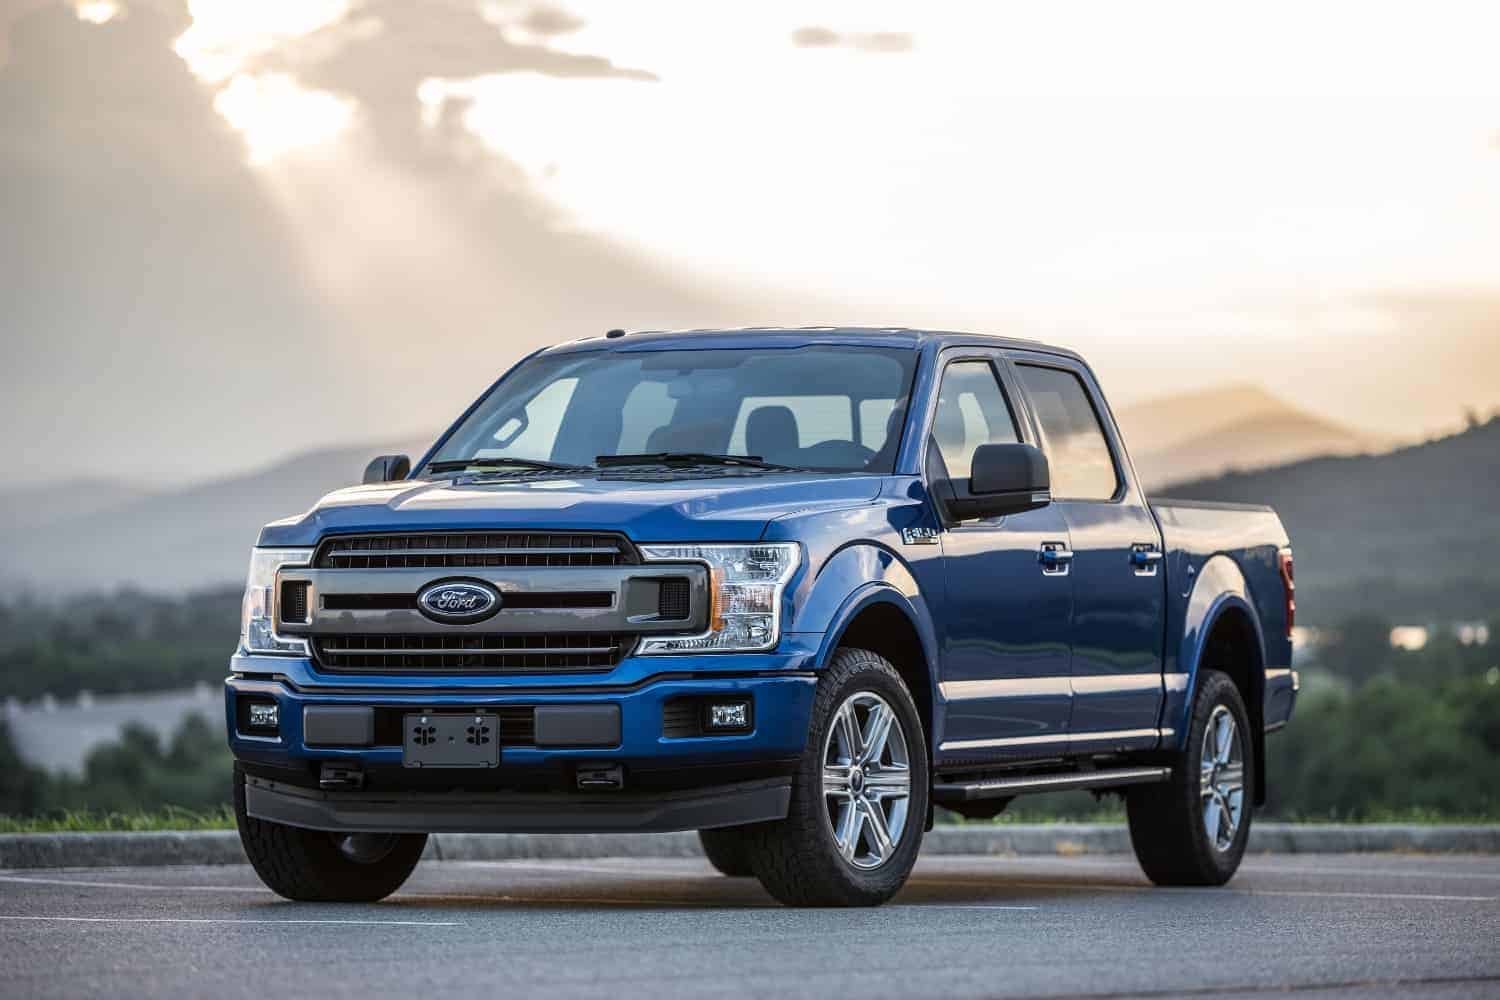 With Ford’s electric F150 pickup, the EV transition shifts into high gear